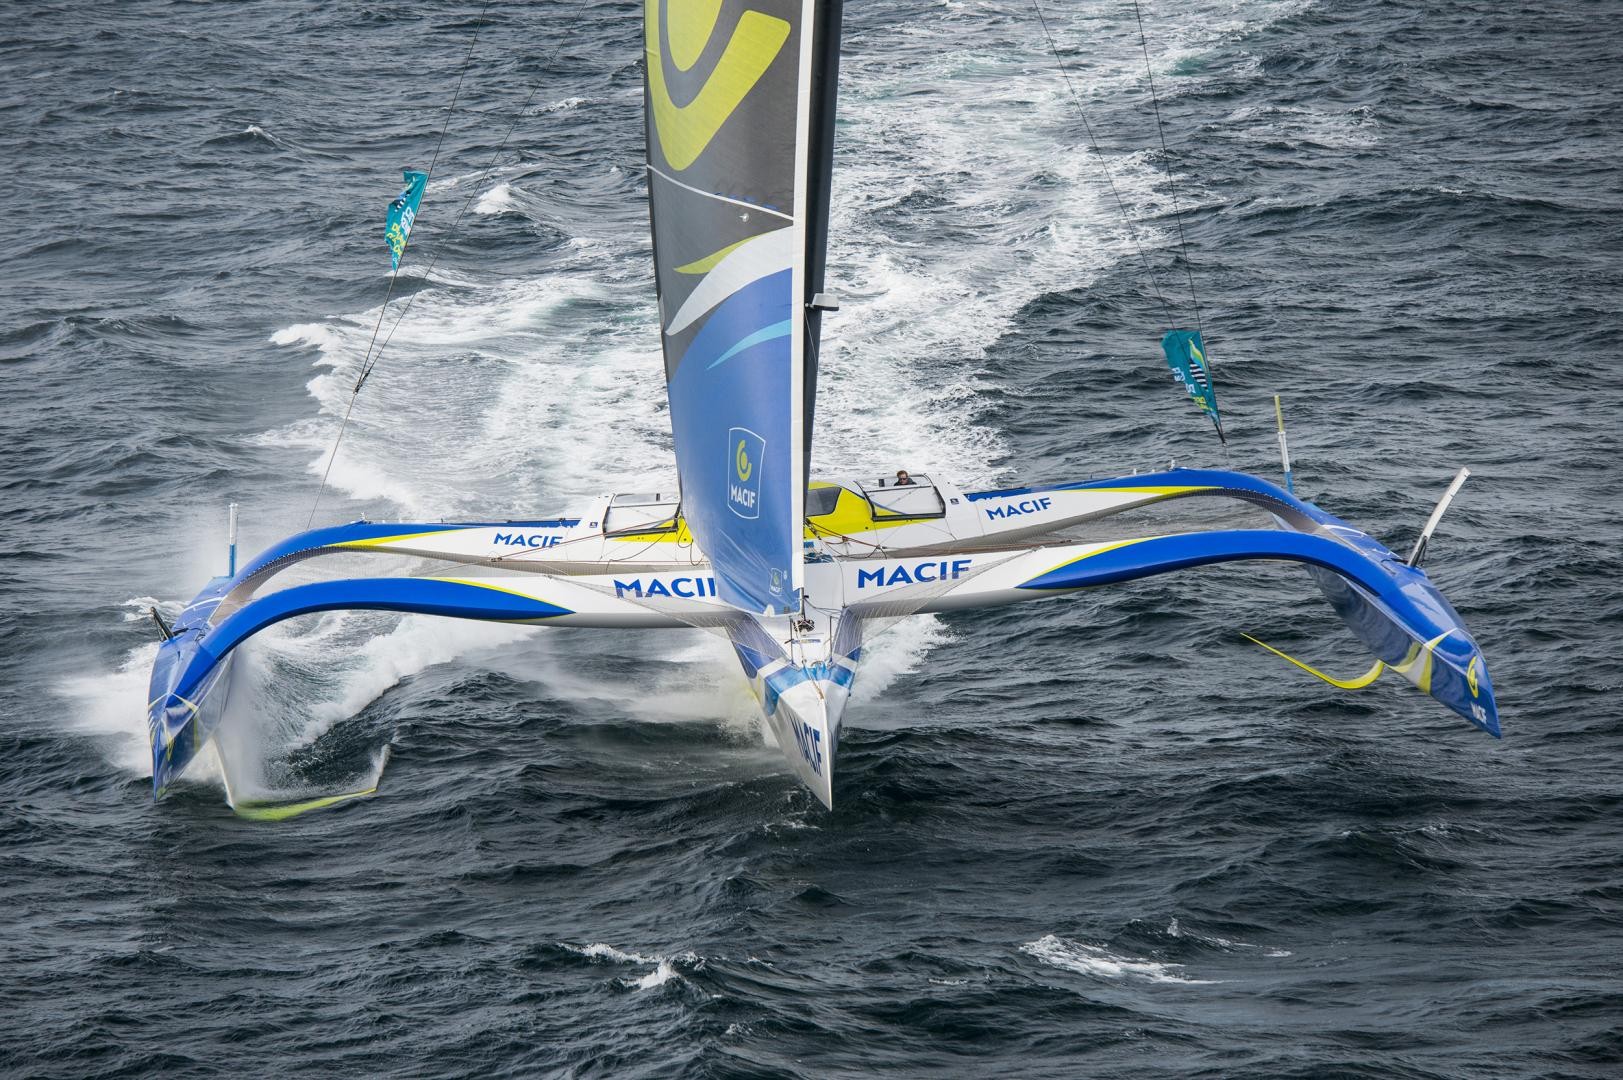 French sailing superstar, François Gabart has less than 800 nautical miles to go to the finish in Guadeloupe